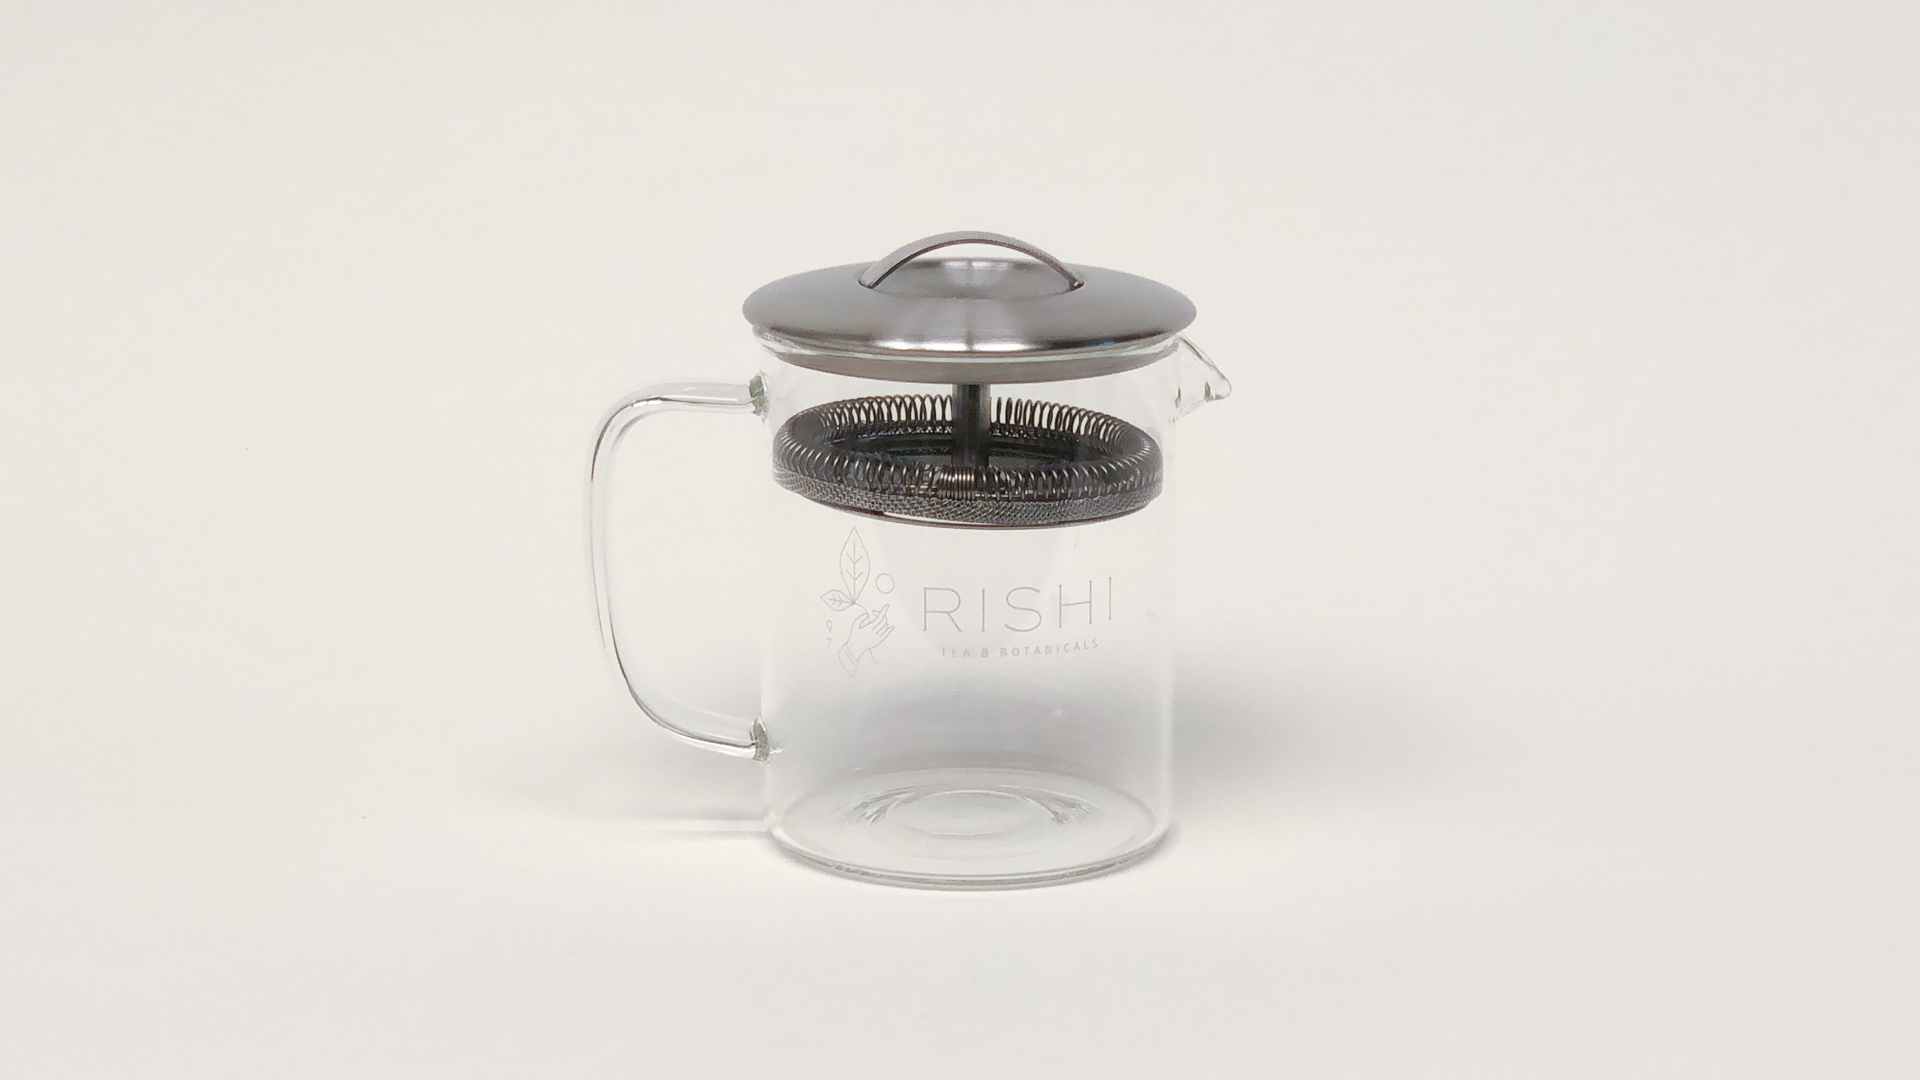 Loose Leaf Tea Press, by Rishi | A CUP OF COMMON WEALTH